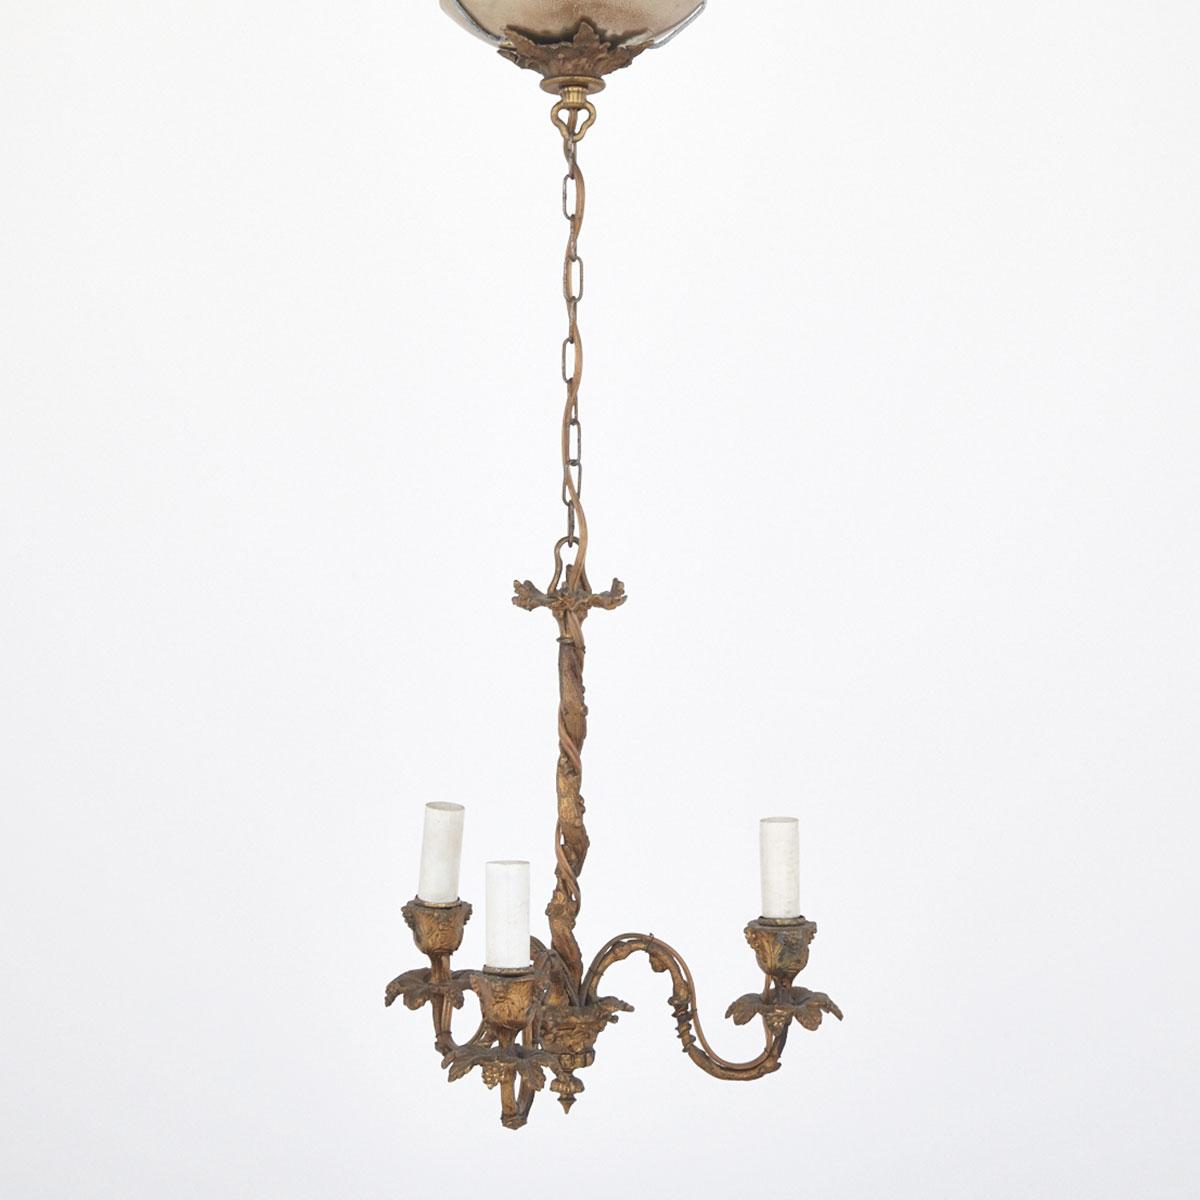 Small French Ormolu Grapvine Form Three Light Ceiling Fixture, Early 20th century